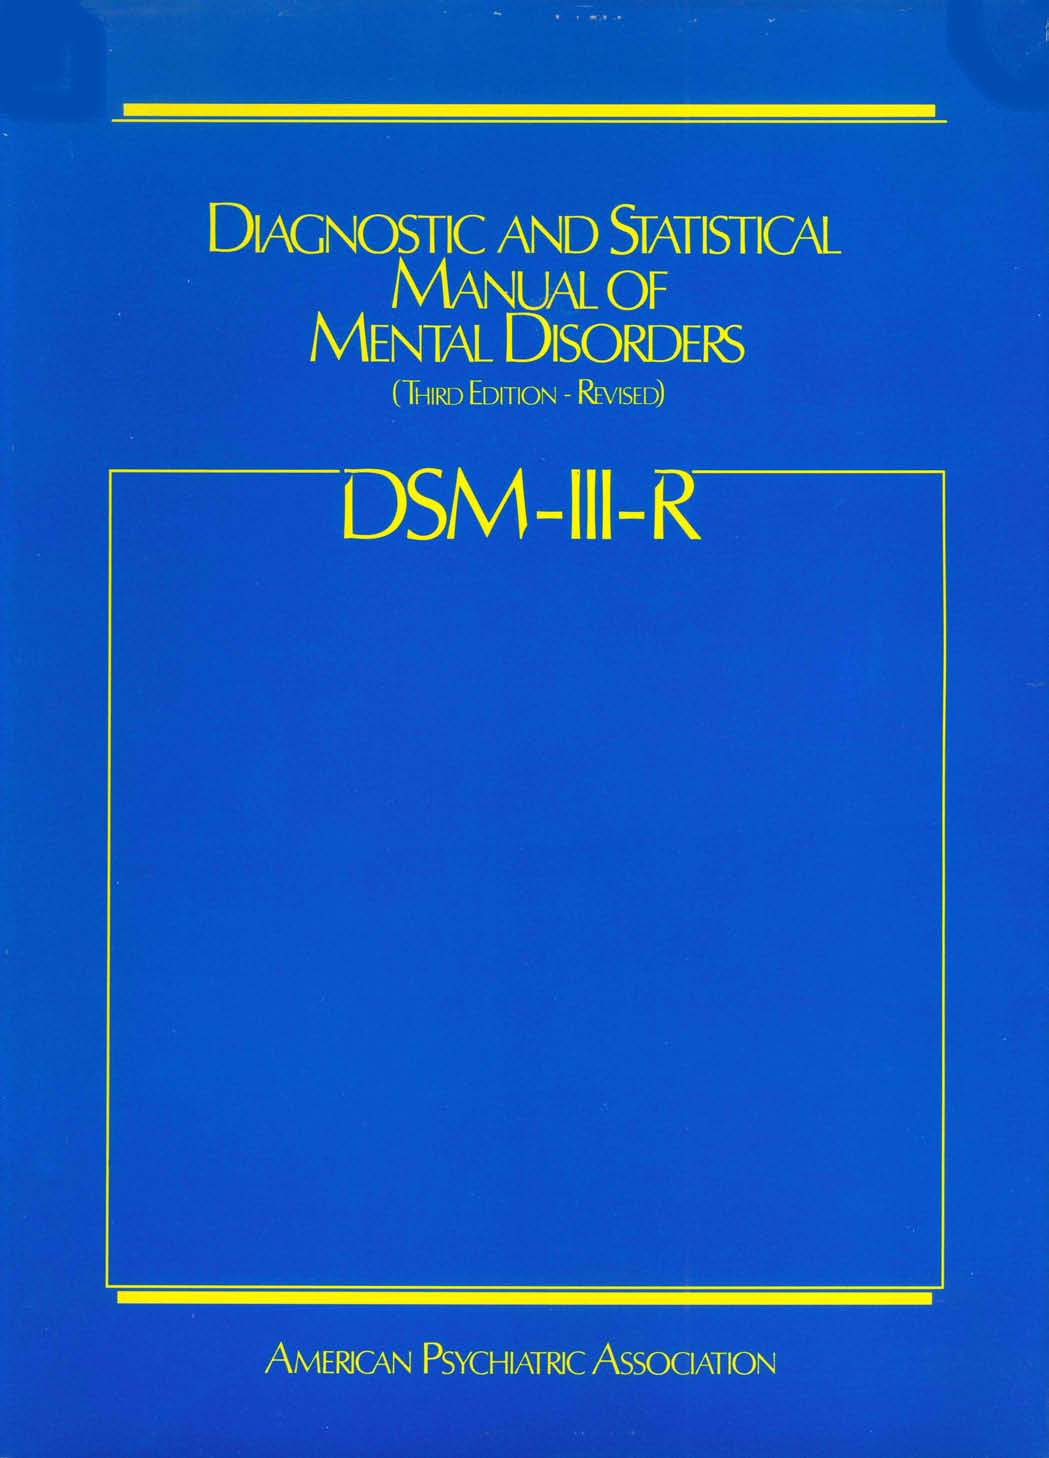 DSM Library cover image